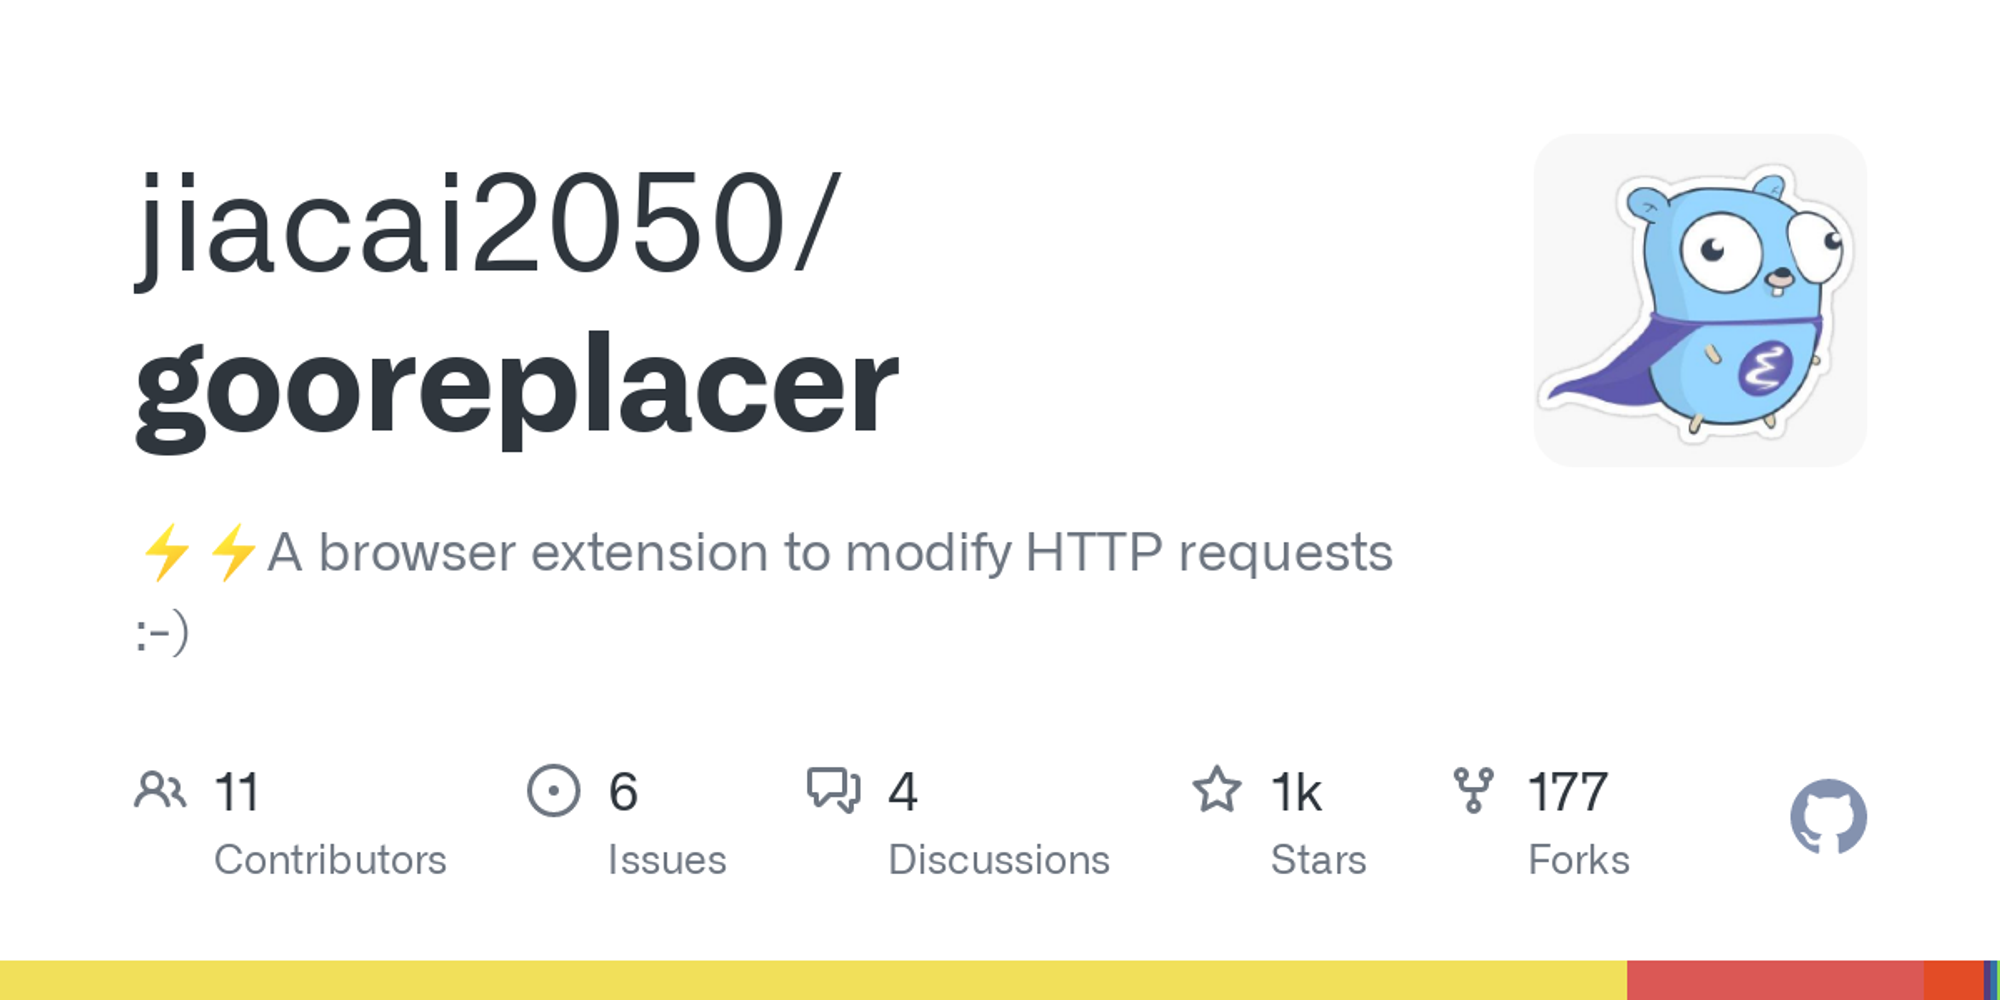 GitHub - jiacai2050/gooreplacer: ⚡️⚡️A browser extension to modify HTTP requests :-)